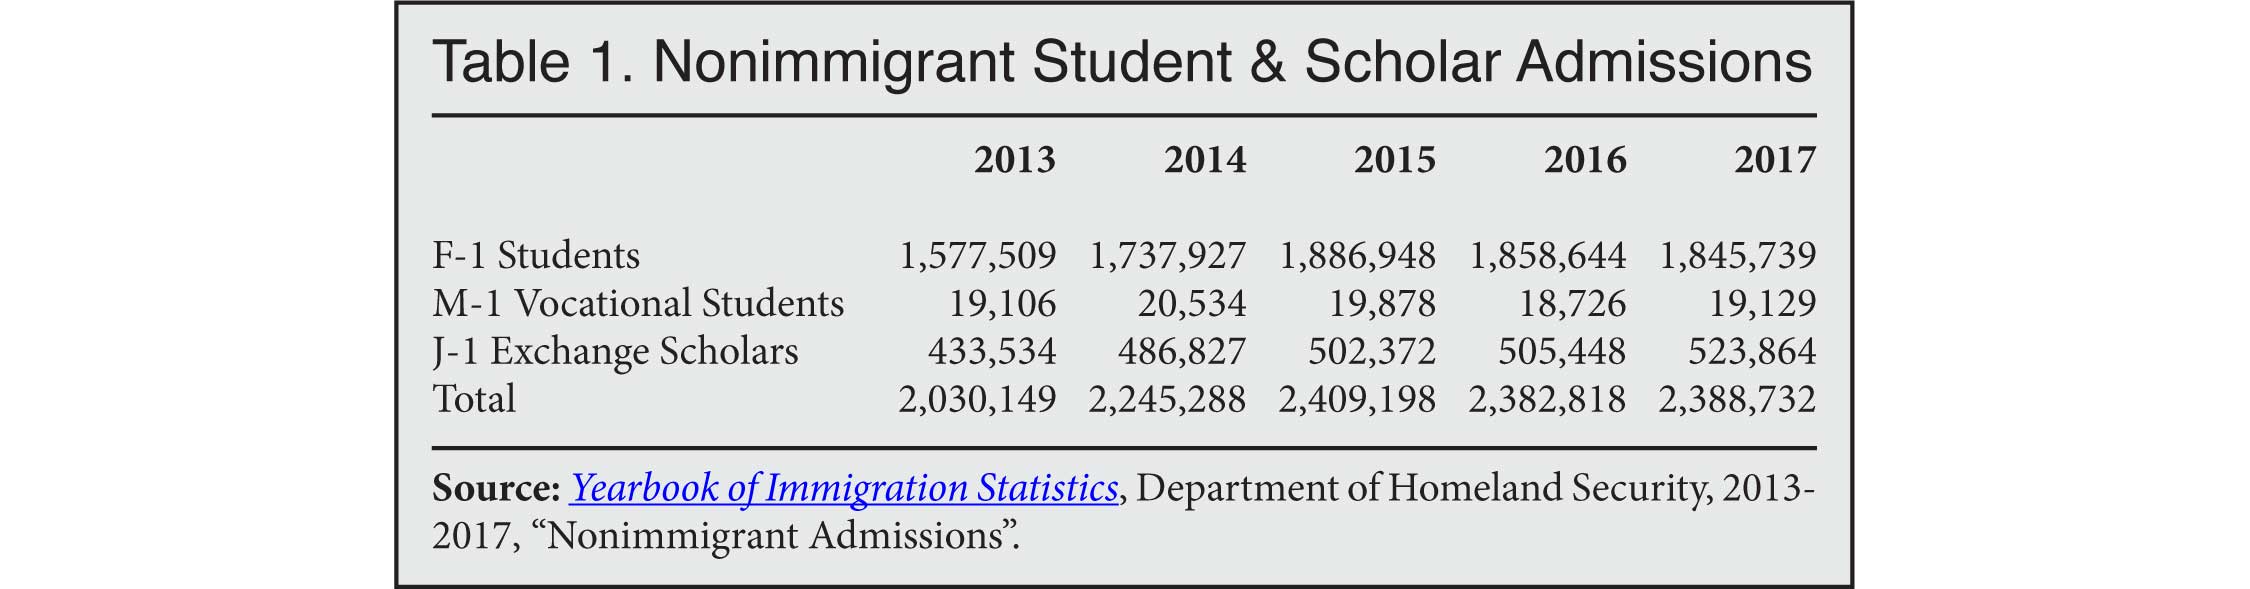 Table: Nonimmigrant Student and Scholar Admissions